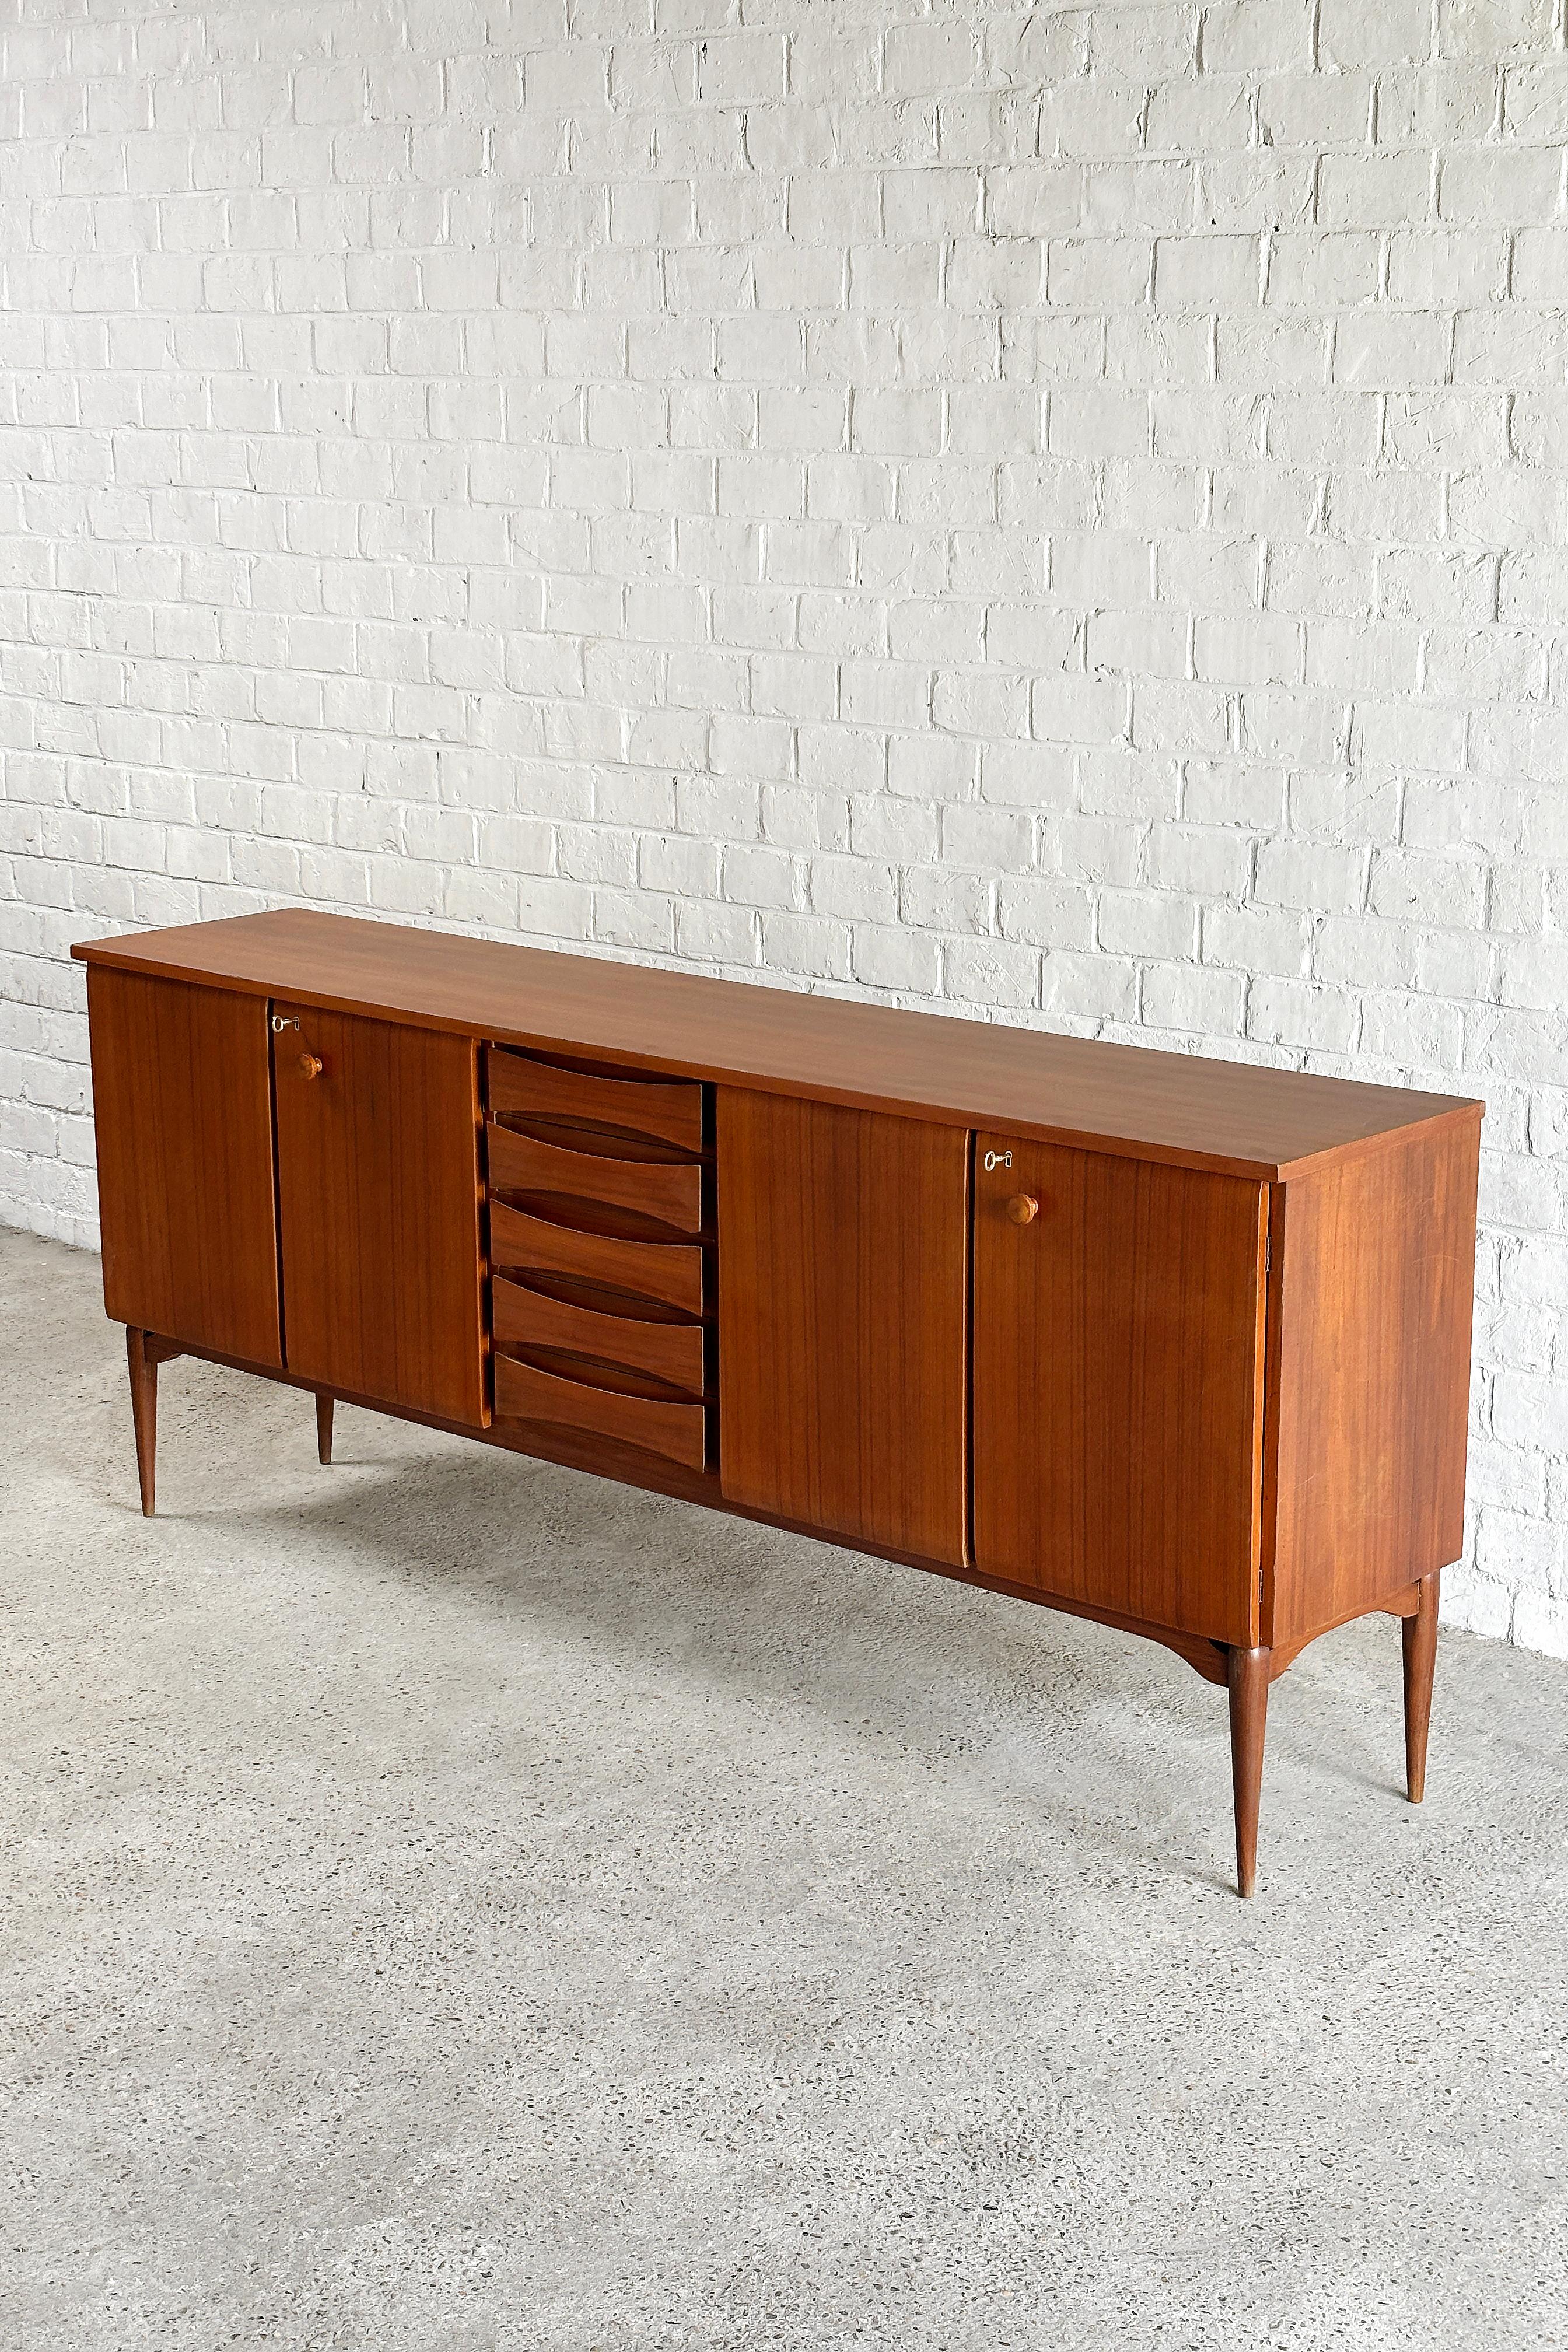 Mid-20th Century Italian Modernist Teak Sideboard Attributed to Vittorio Dassi, 1960's For Sale